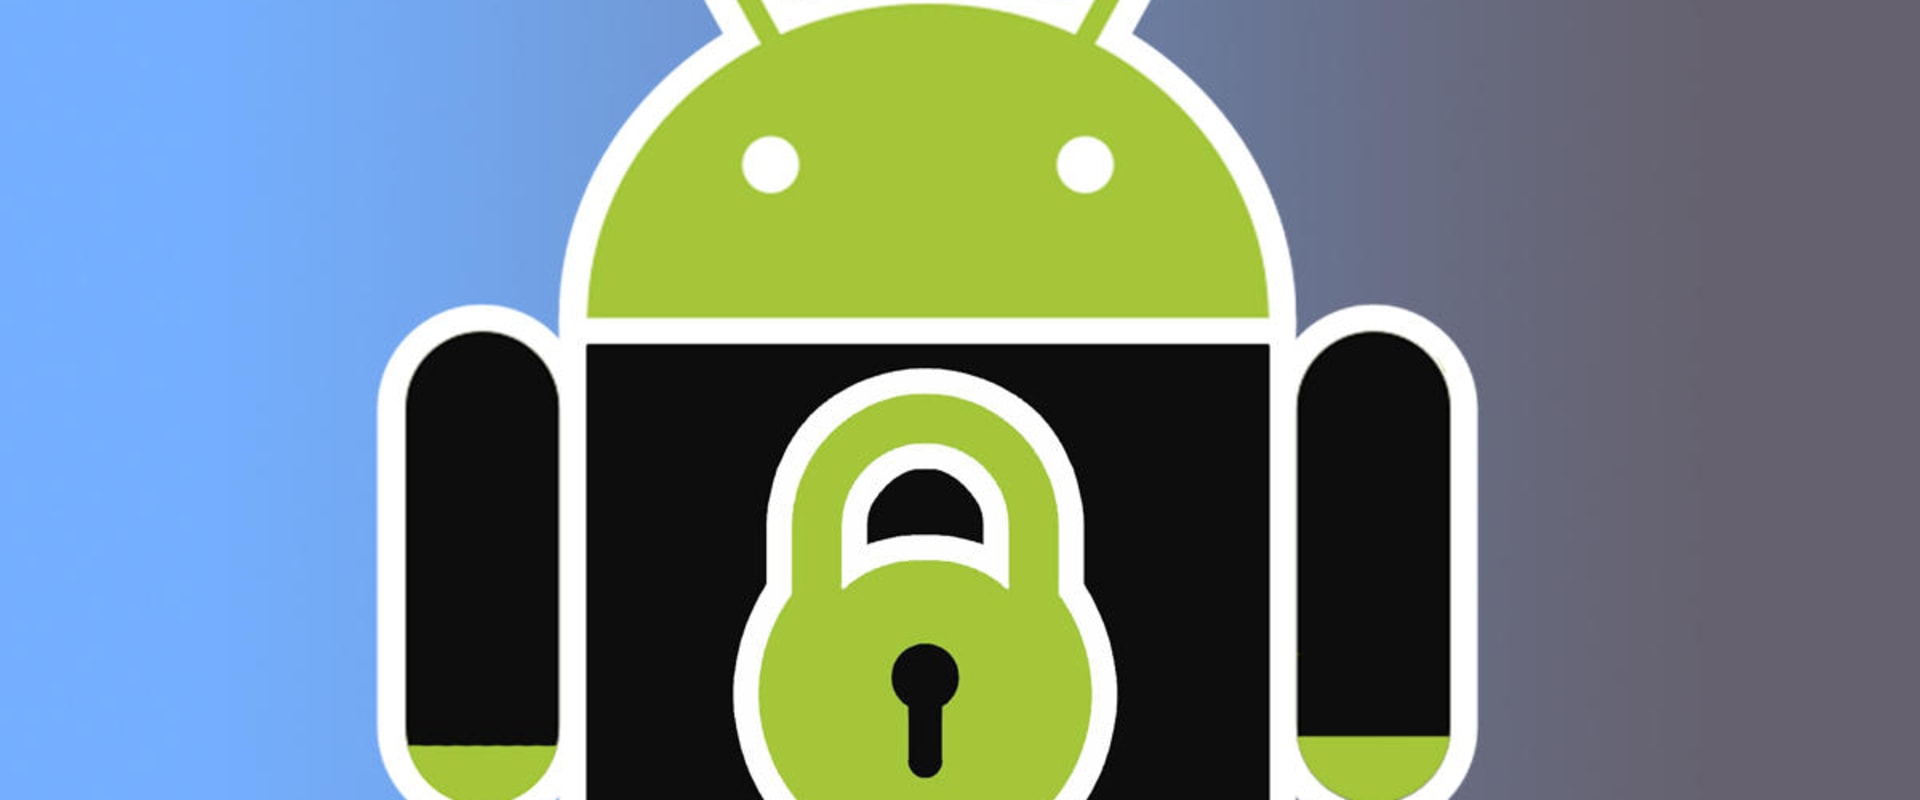 Verifying the Authenticity of an Android APK File